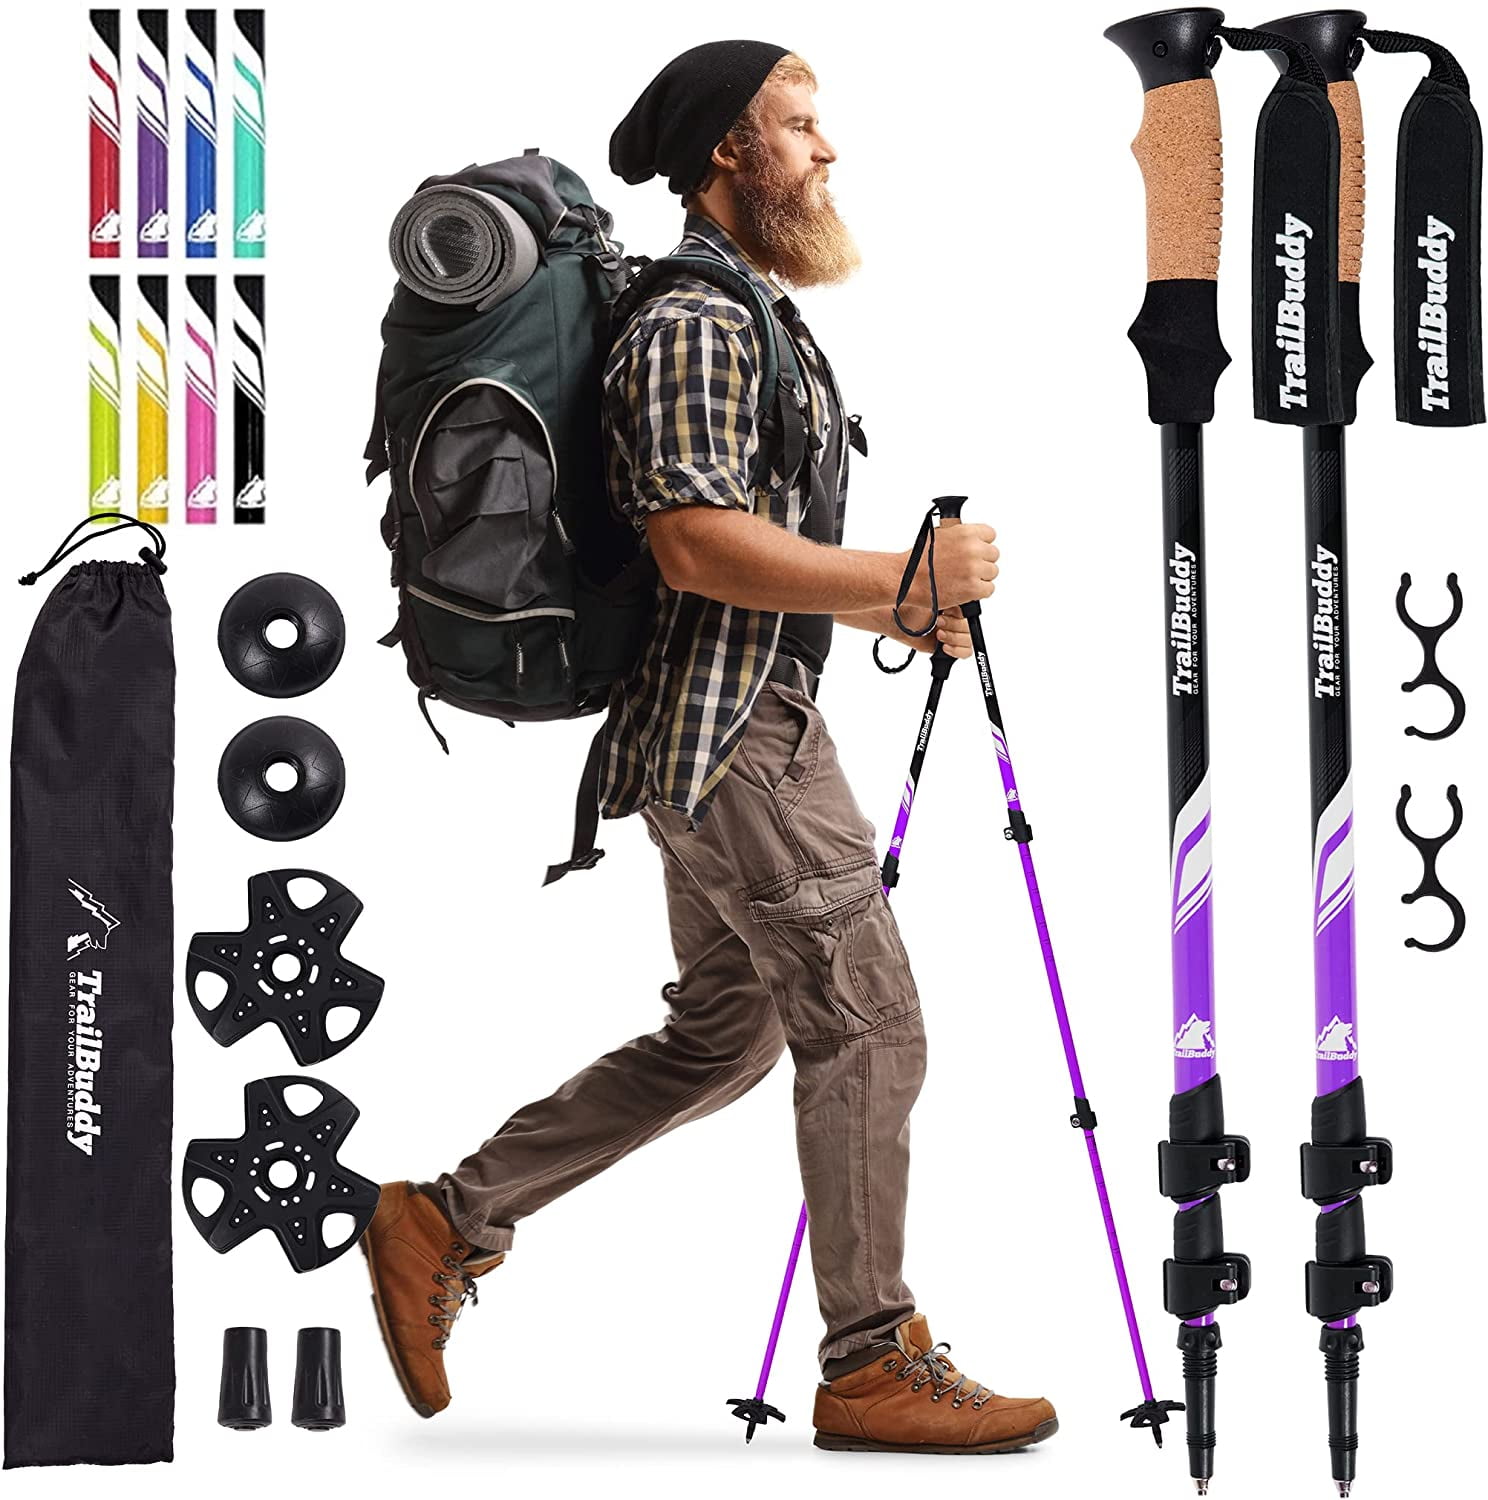 CLINE Travel Folding Trekking Hiking Pole with Carrying Case,Collapsible Cane Adjustable Walking Stick Portable Mobility Aid for Women Men Hikers Gift,Black 